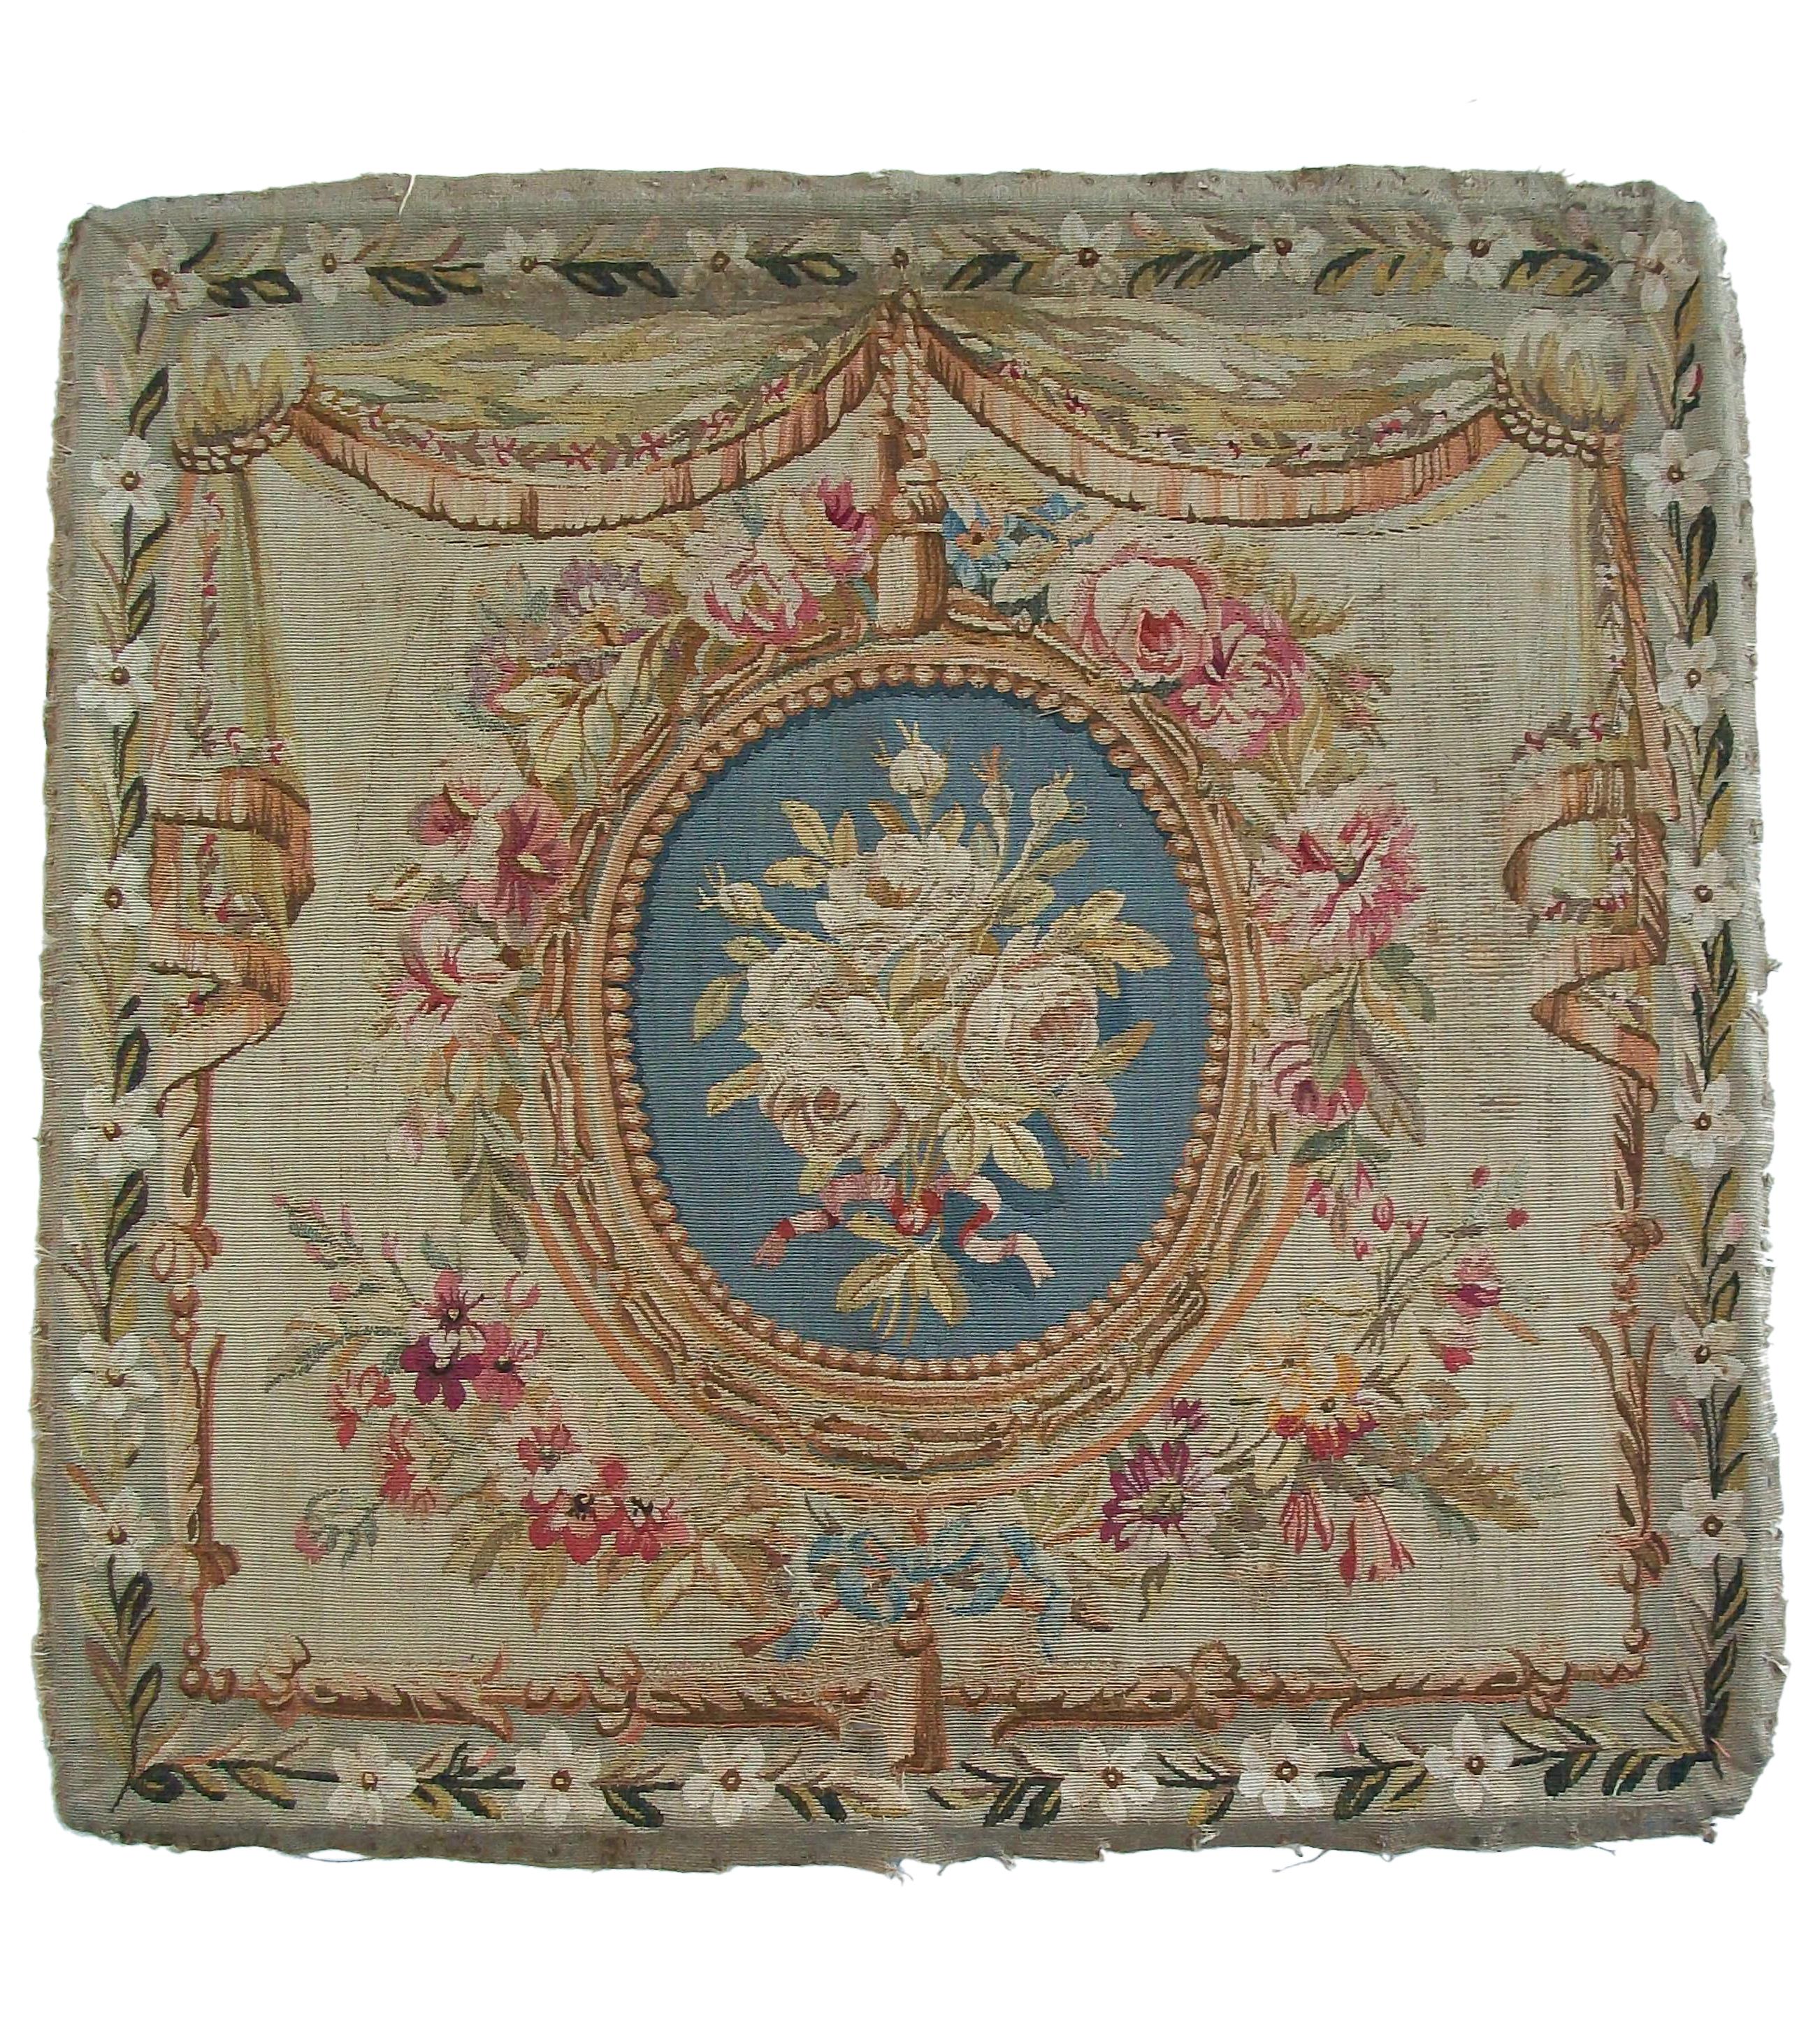 PIERRE ADRIEN CHABAL-DUSSURGEY (1819-1902) Designer - BEAUVAIS TAPESTRY MANUFACTORY Maker - Important Antique Louis XVI style floral tapestry chair back - the floral tapestry finely woven in wool and silk threads with garlands and swags and tassels